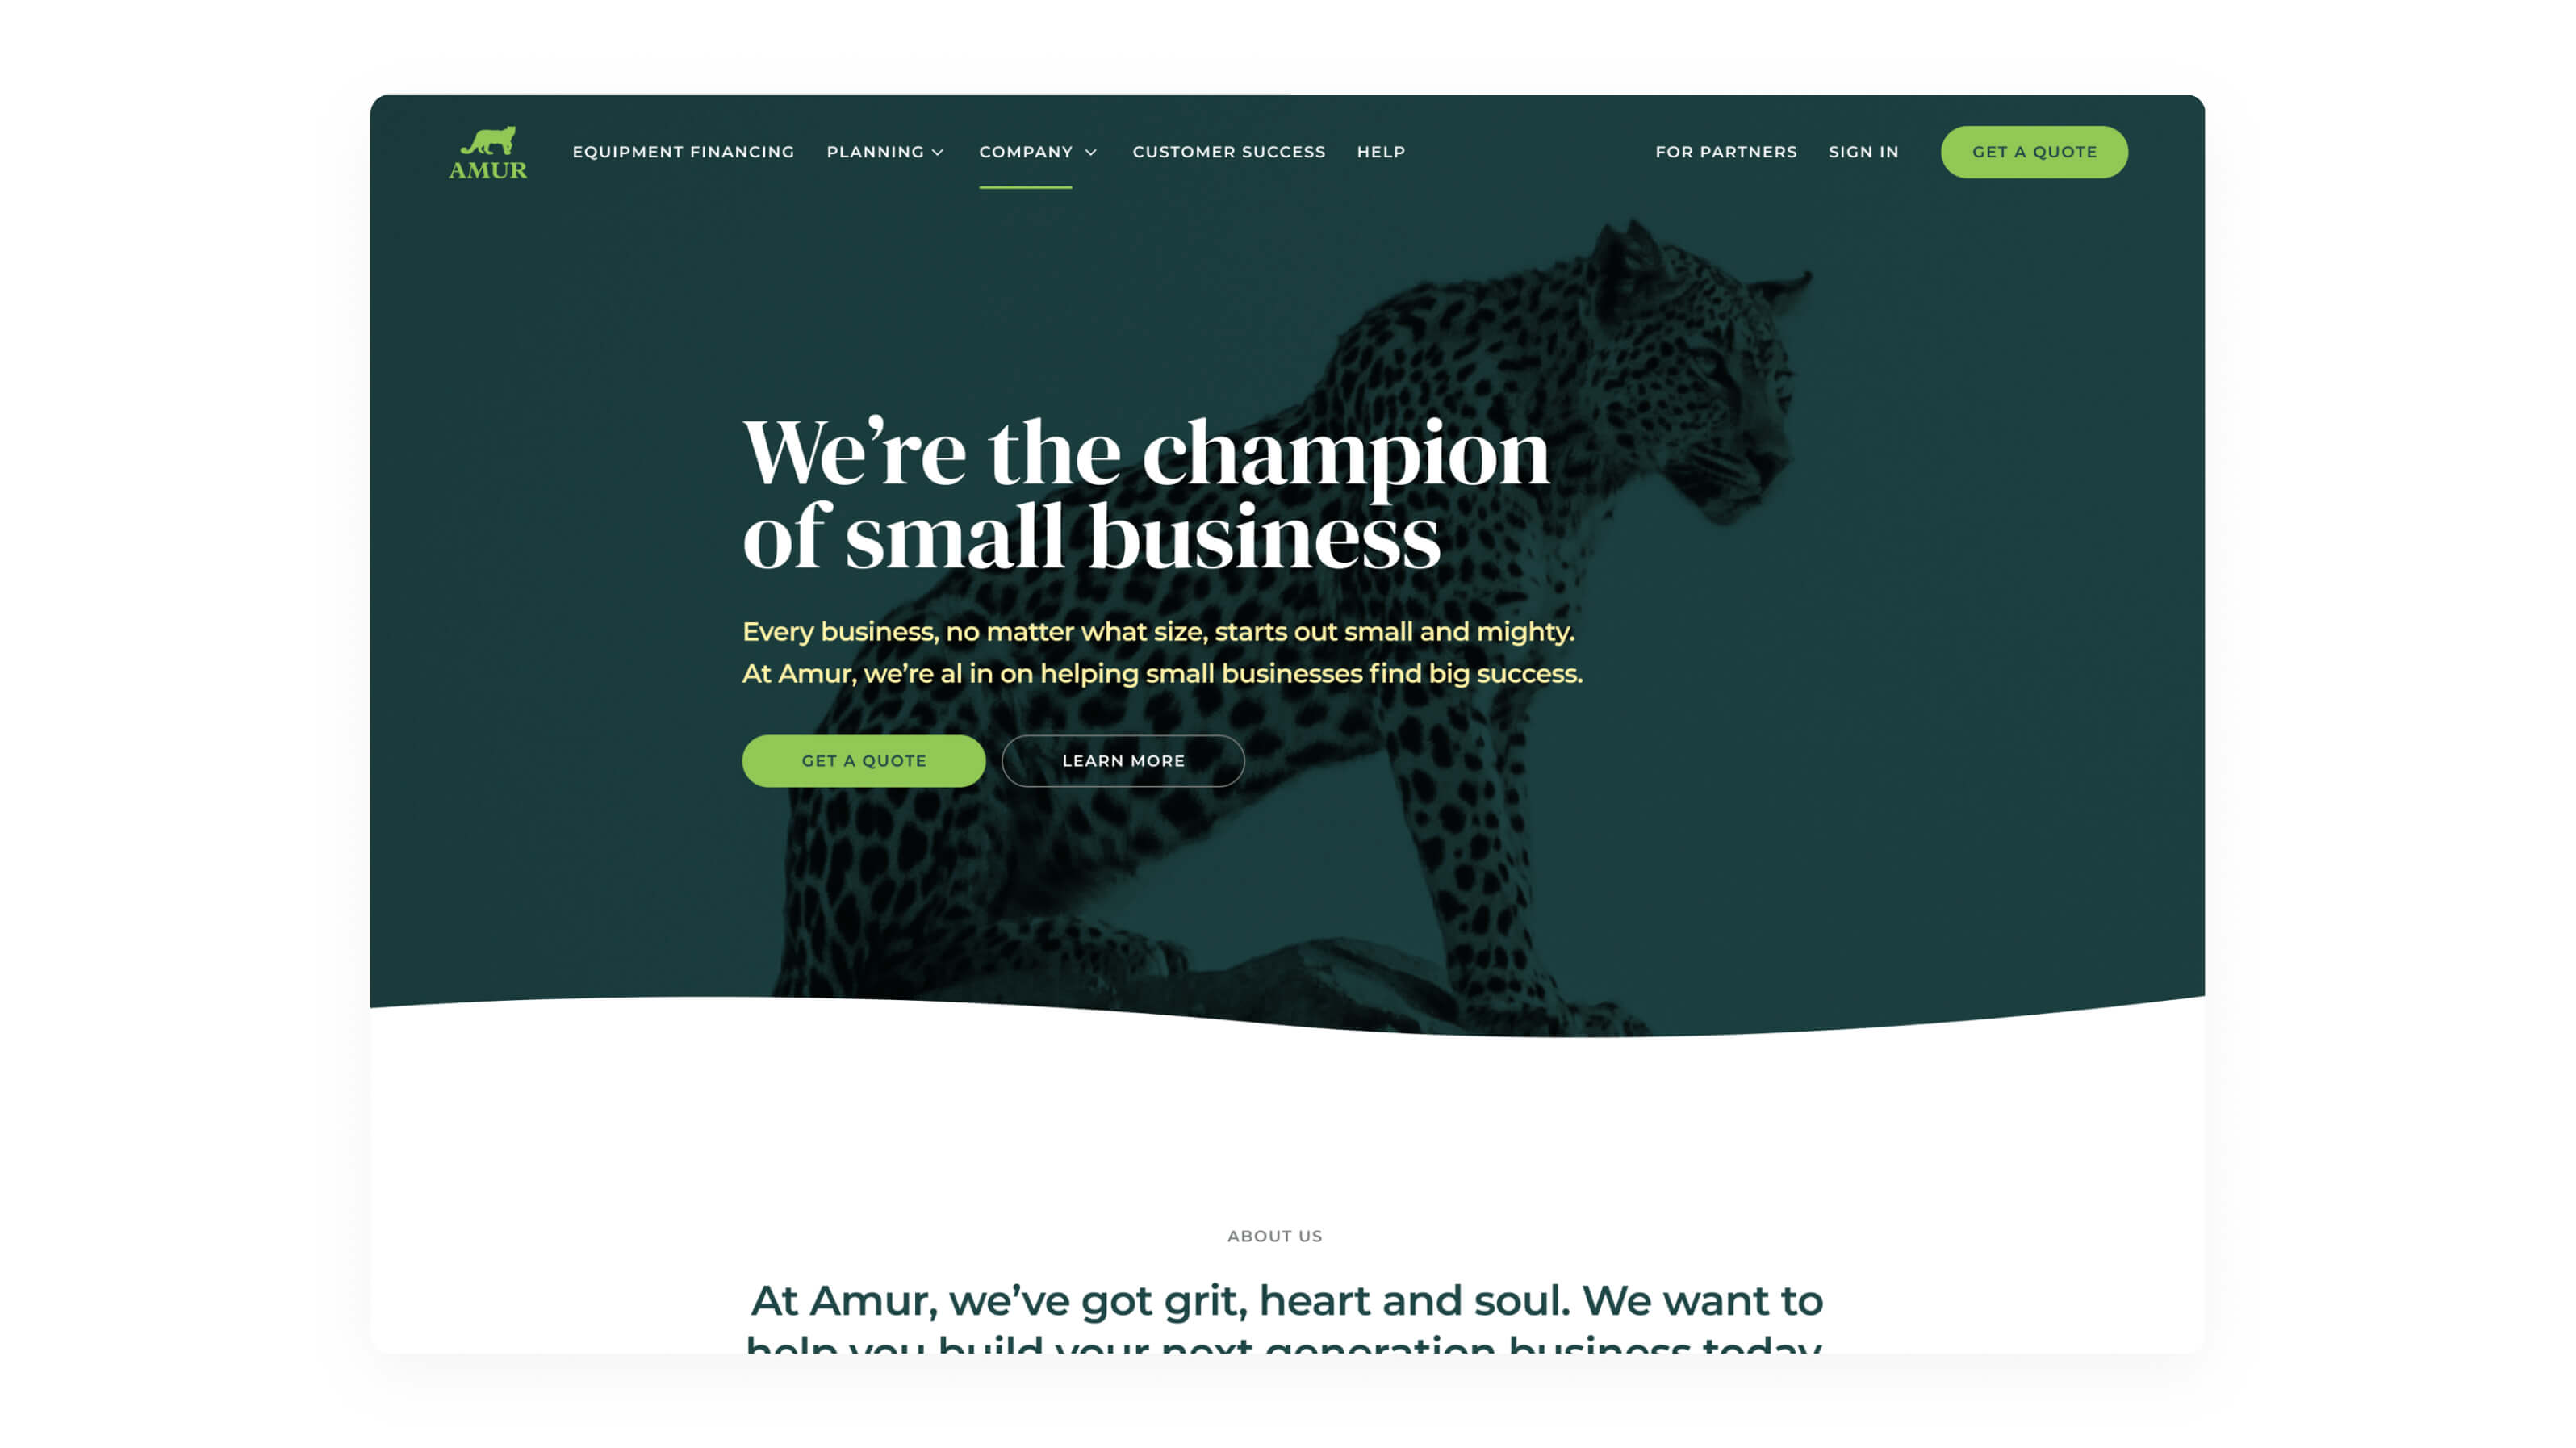 Screenshot of the Amur marketing website. Large green feature area with a picture of a Leopard and a message about Amur being the Champion of Small Business.